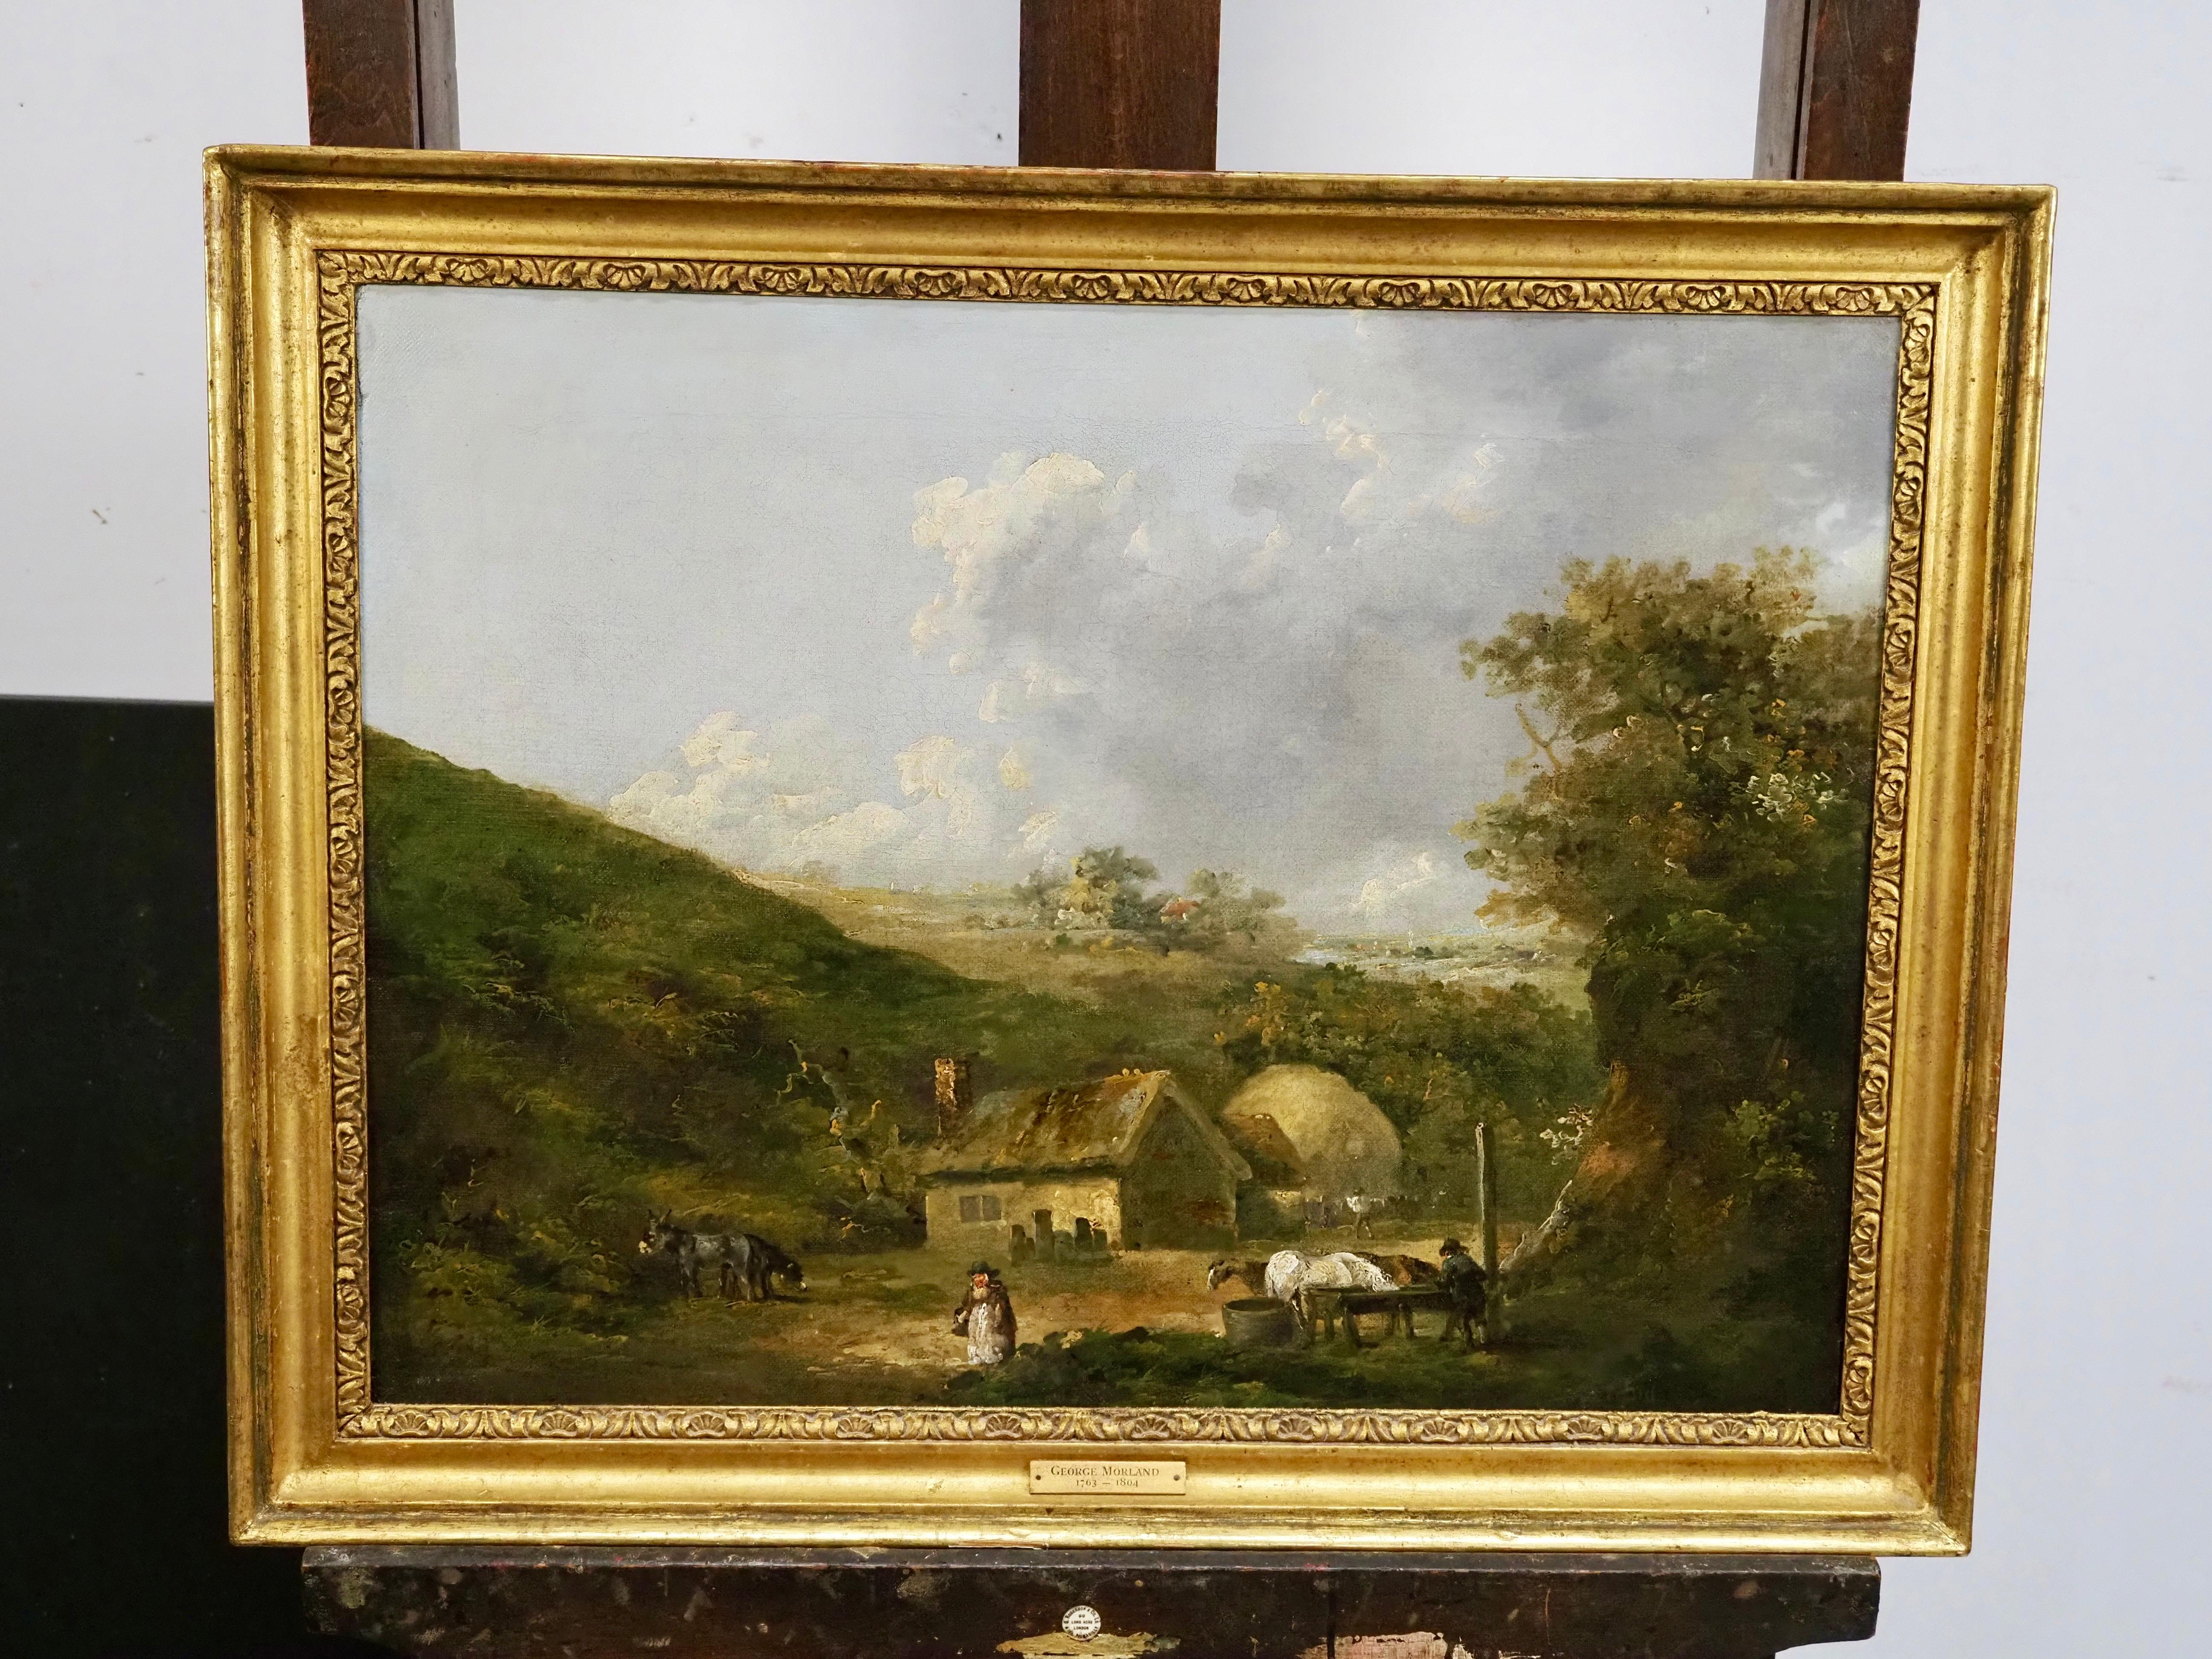 A farmstead in a landscape - English School Painting by George Morland